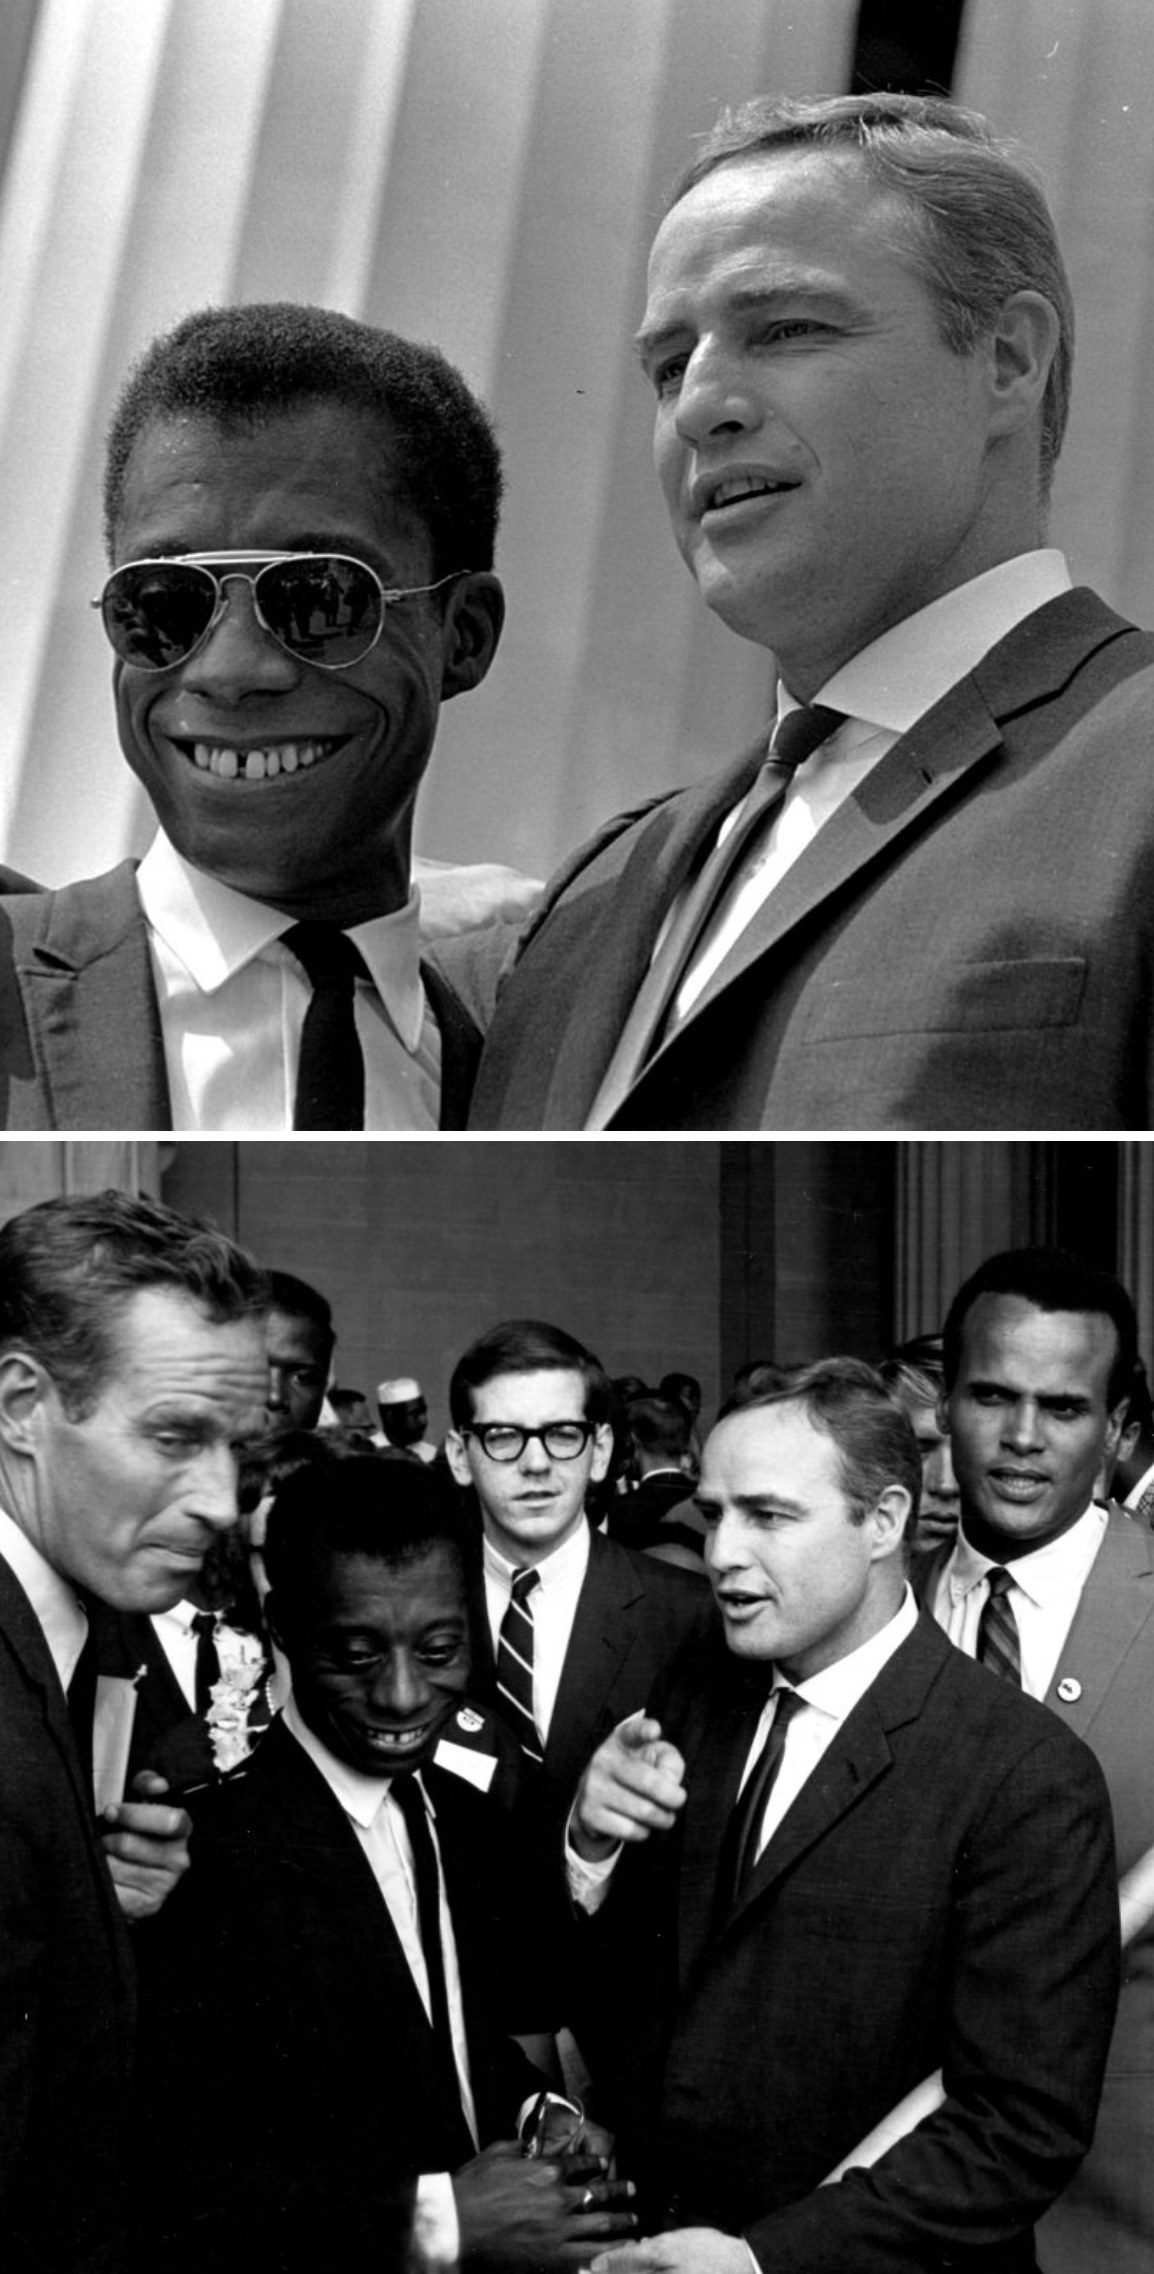 Baldin and Brando at the Lincoln Memorial during the March on Washington for Jobs and Freedom in 1963